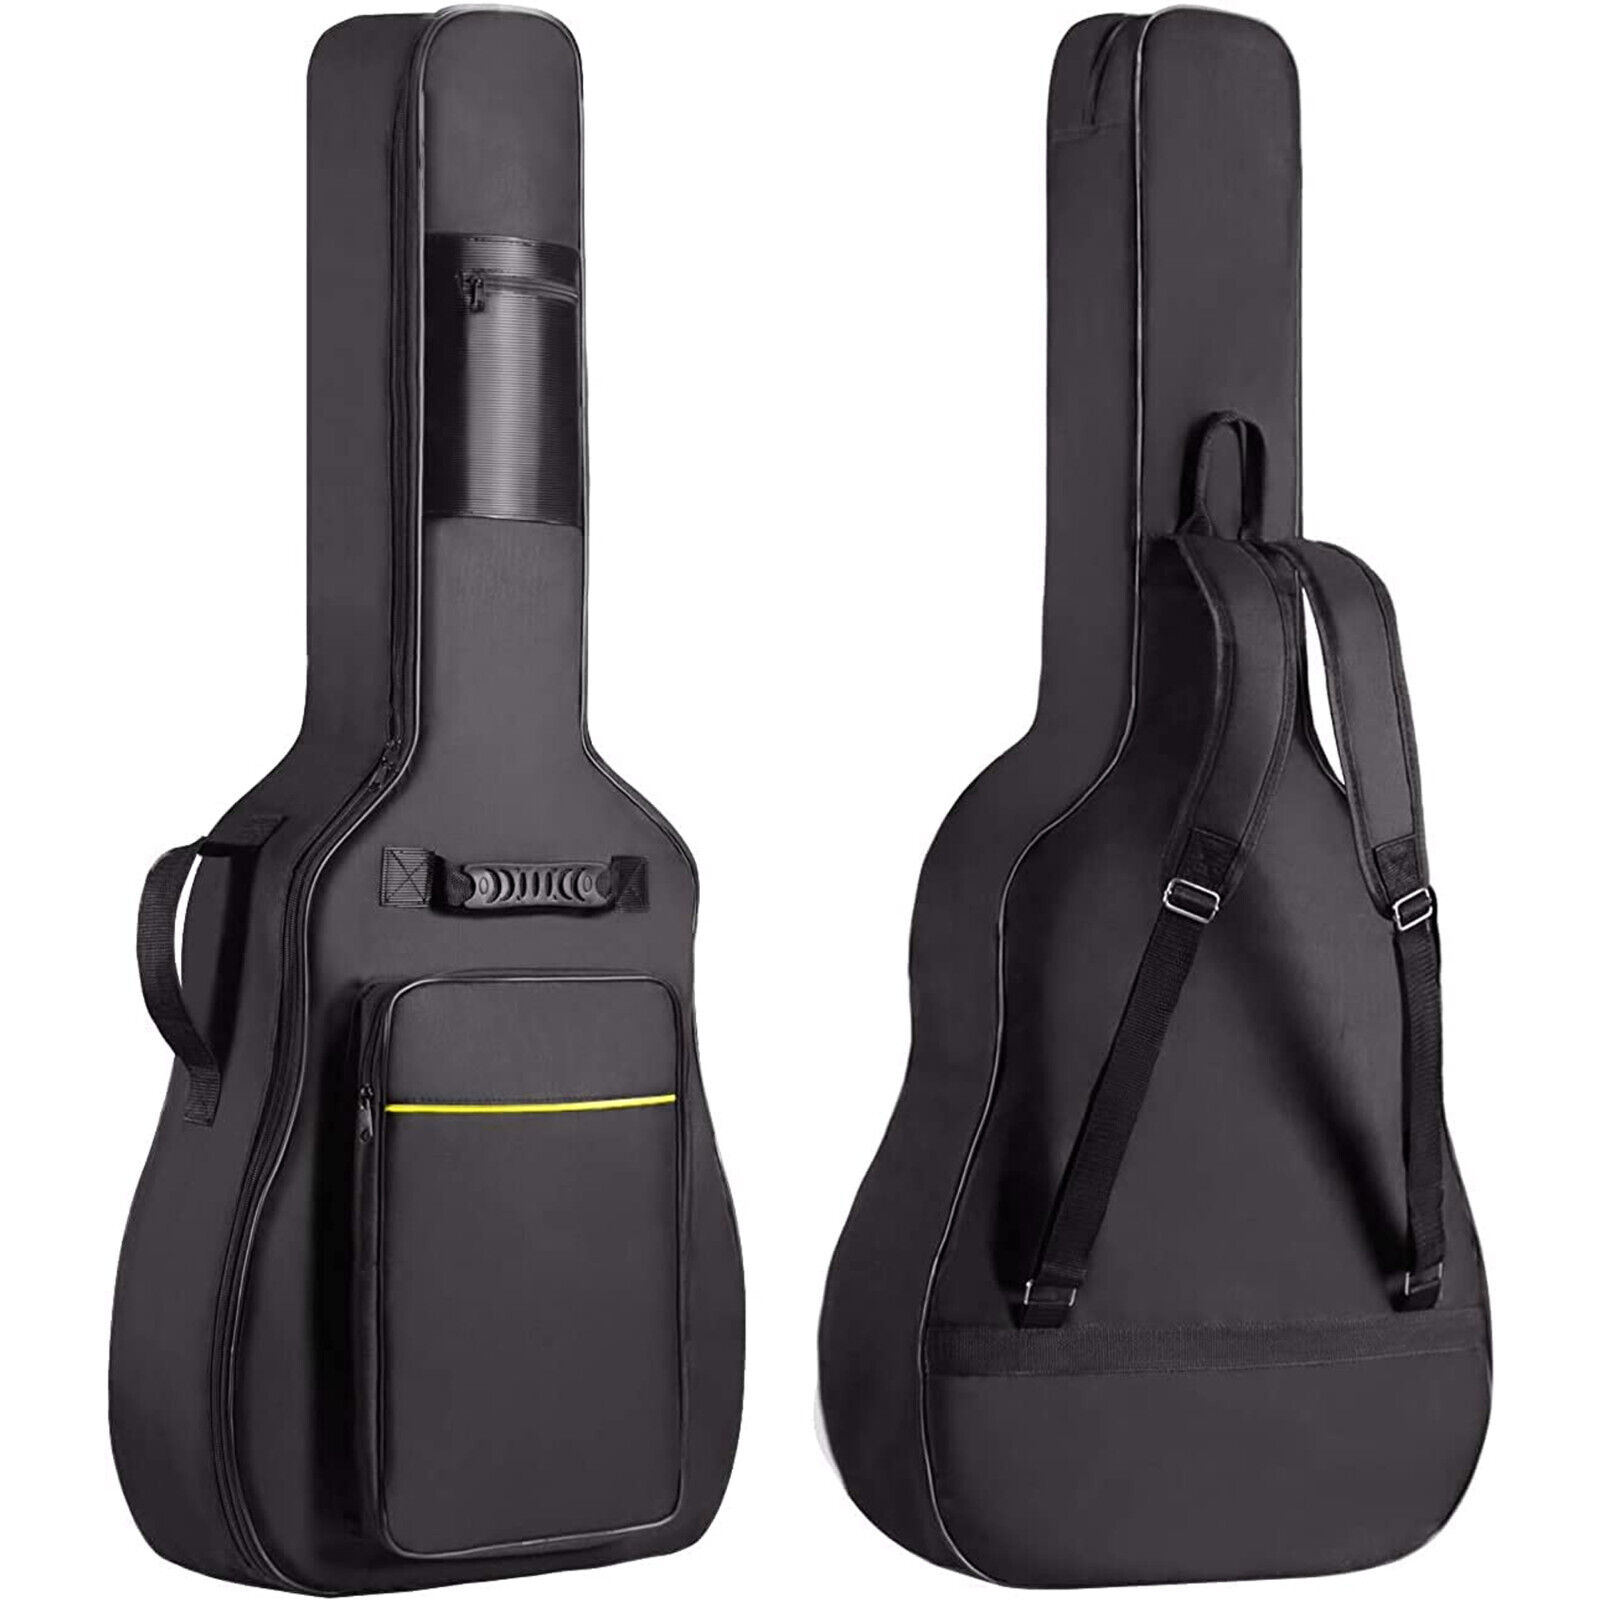 NEW BLACK PADDED FULL SIZE ACOUSTIC CLASSICAL GUITAR BAG CASE COVER HIGH QUALITY